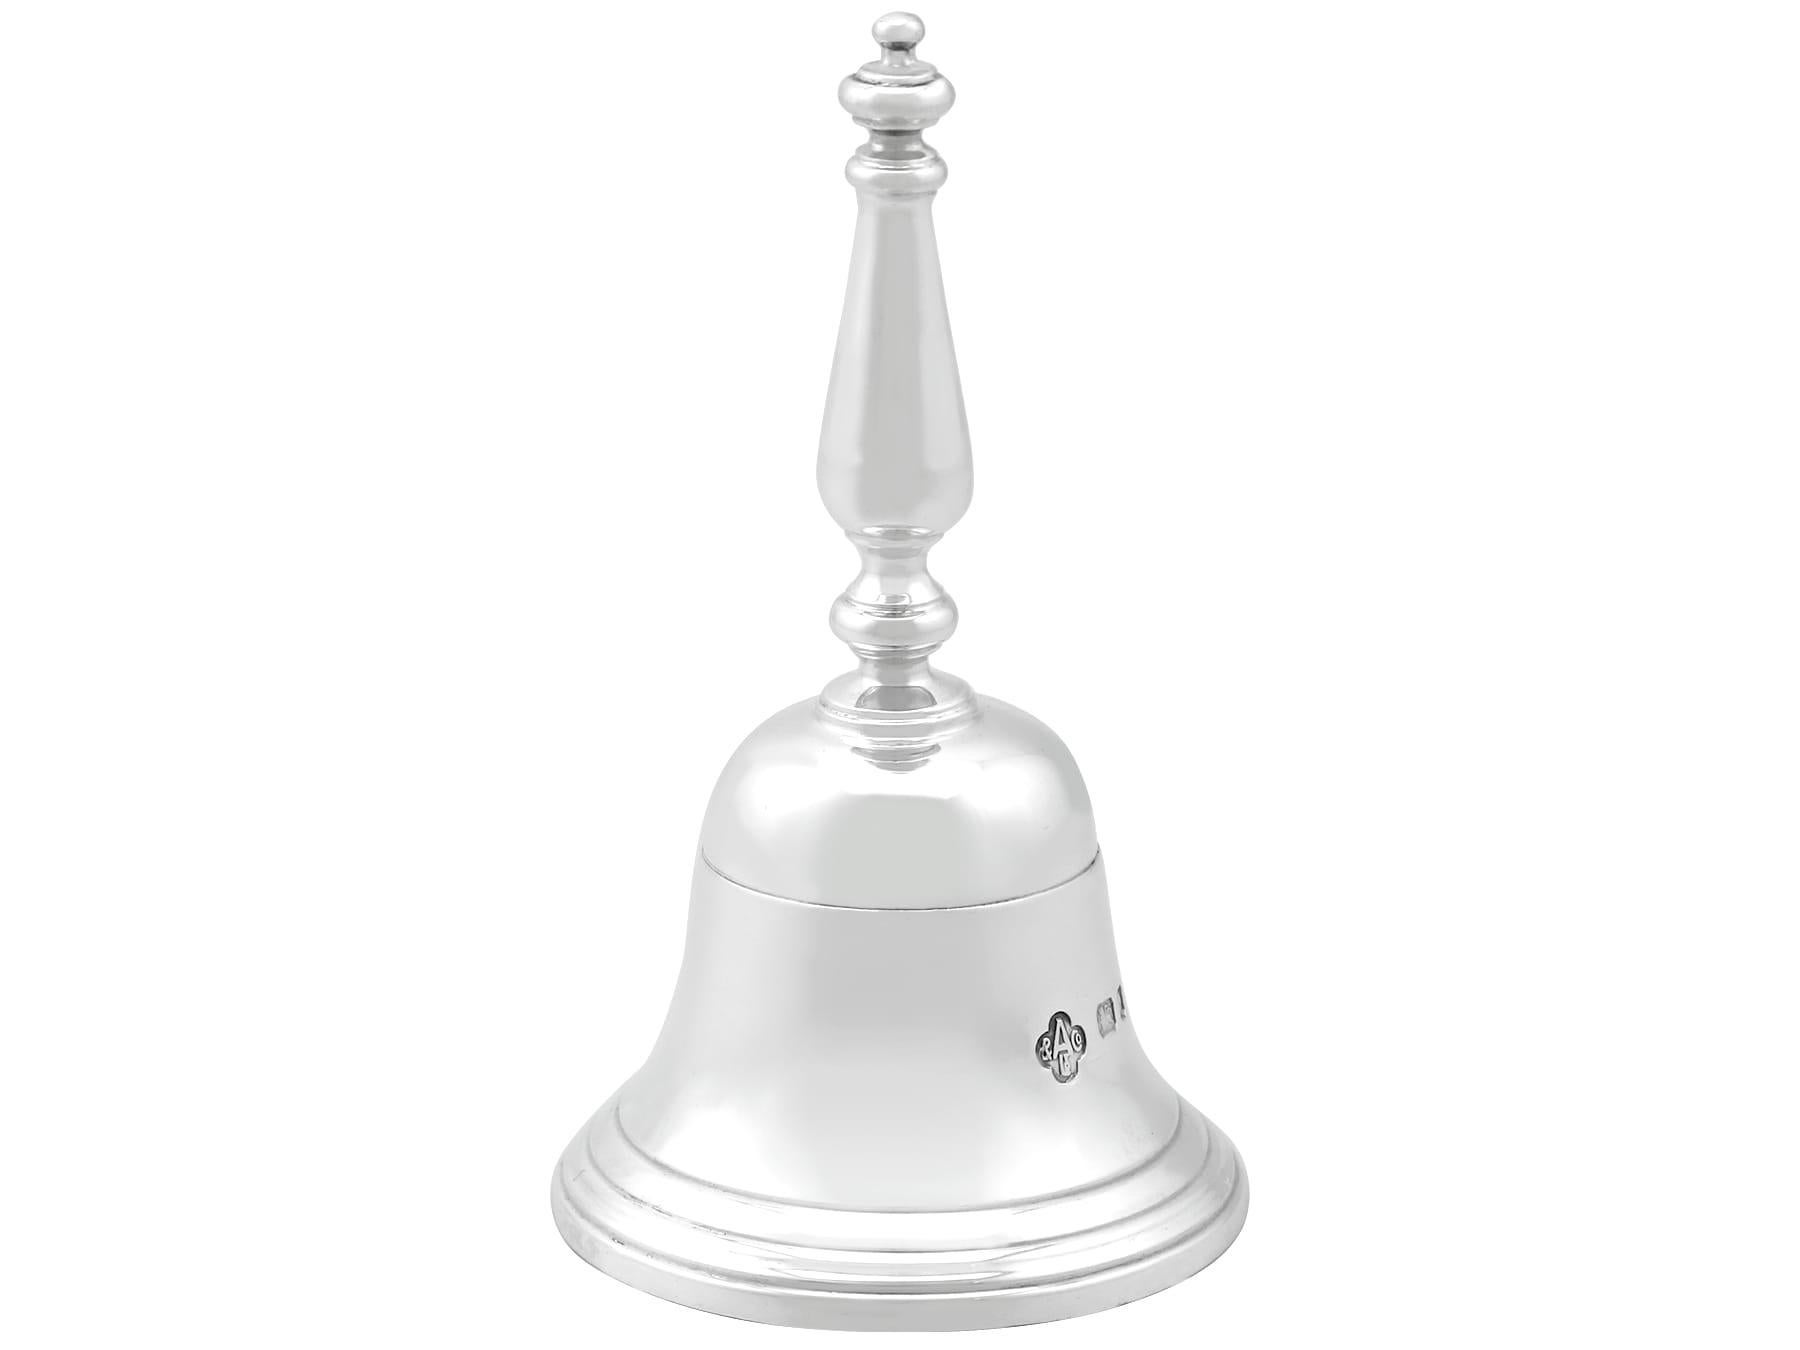 An exceptional, fine and impressive vintage English sterling silver table bell made by Asprey & Co Ltd; an addition to our range of ornamental silverware

This exceptional vintage Elizabeth II sterling silver table bell has a plain bell shaped